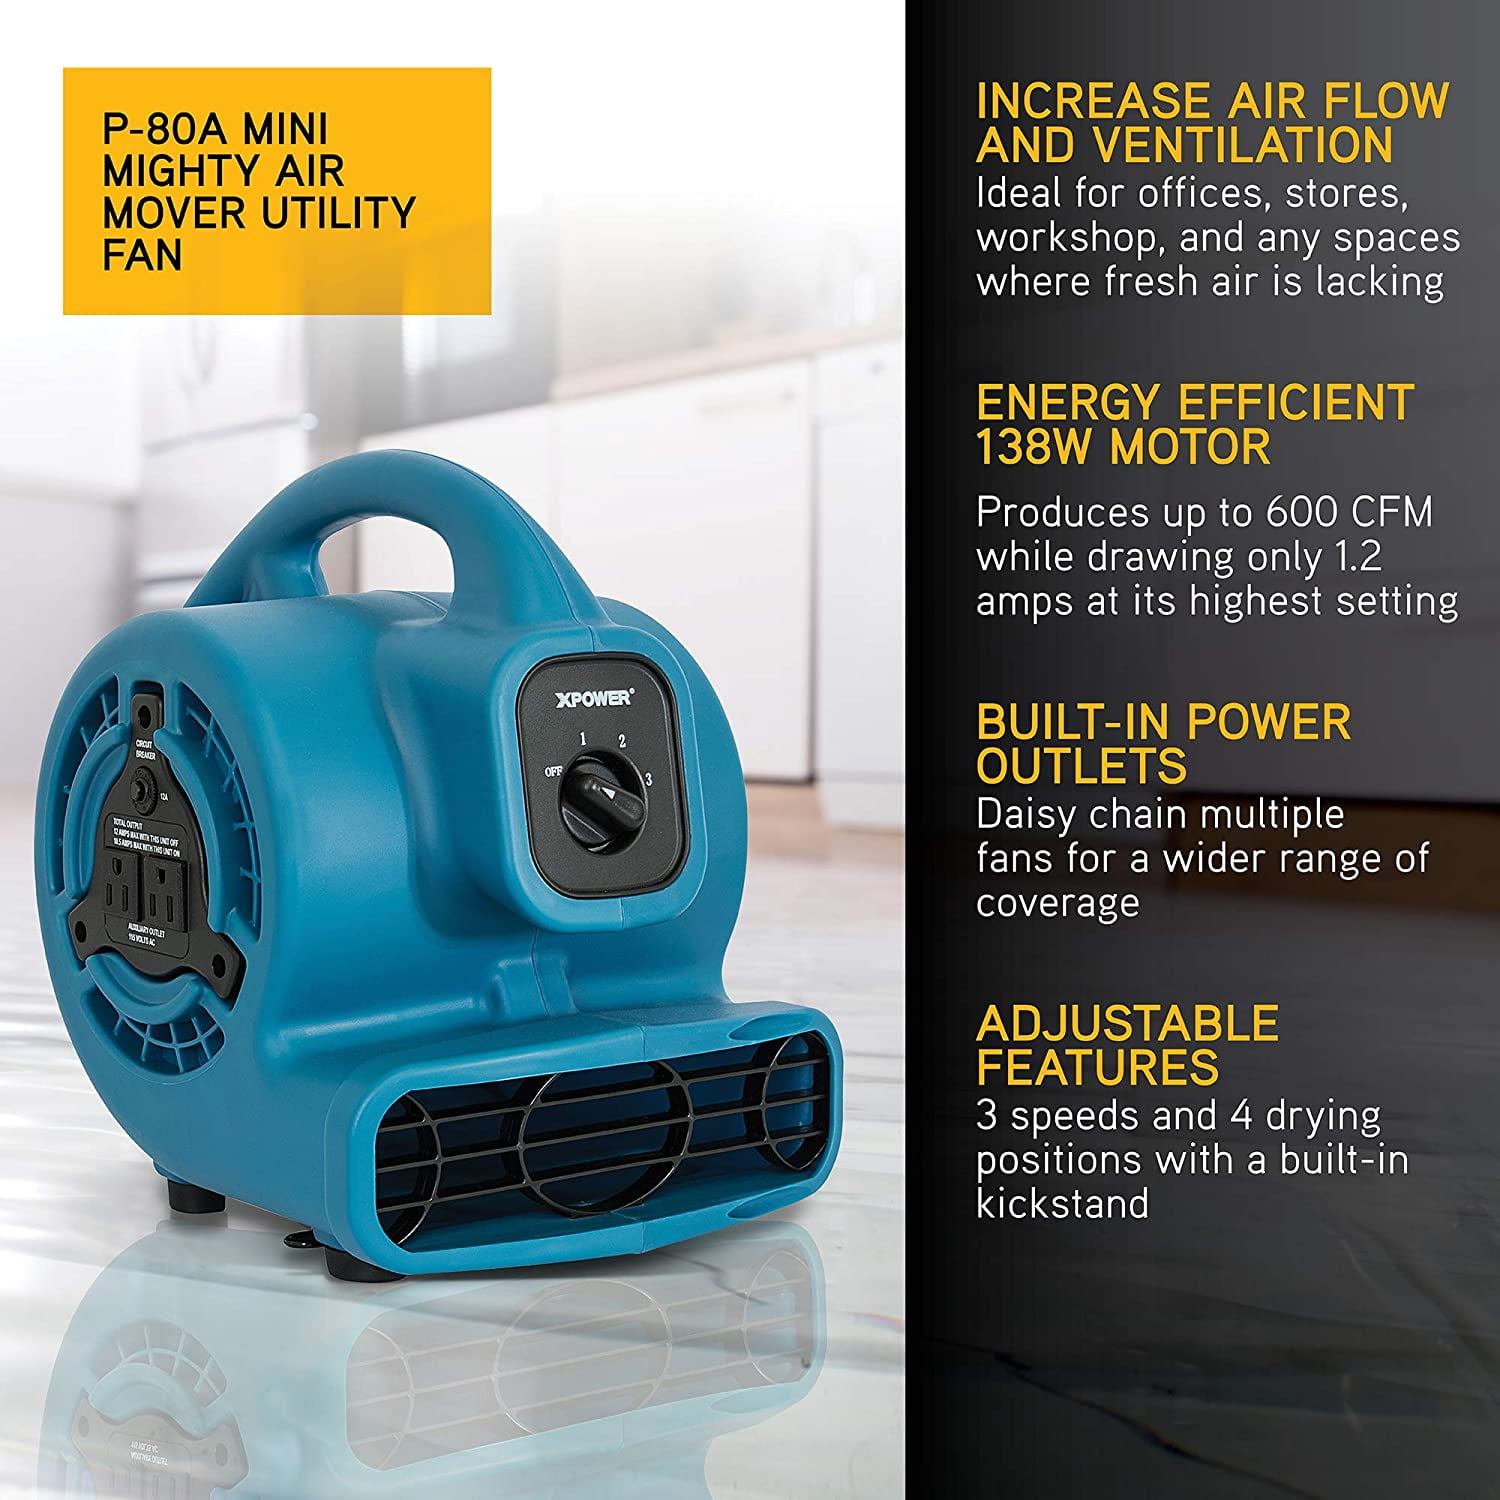 XPOWER P-80A Mini Mighty Air Mover, Utility Fan, Dryer, Blower with  Built-in Power Outlets - Blue